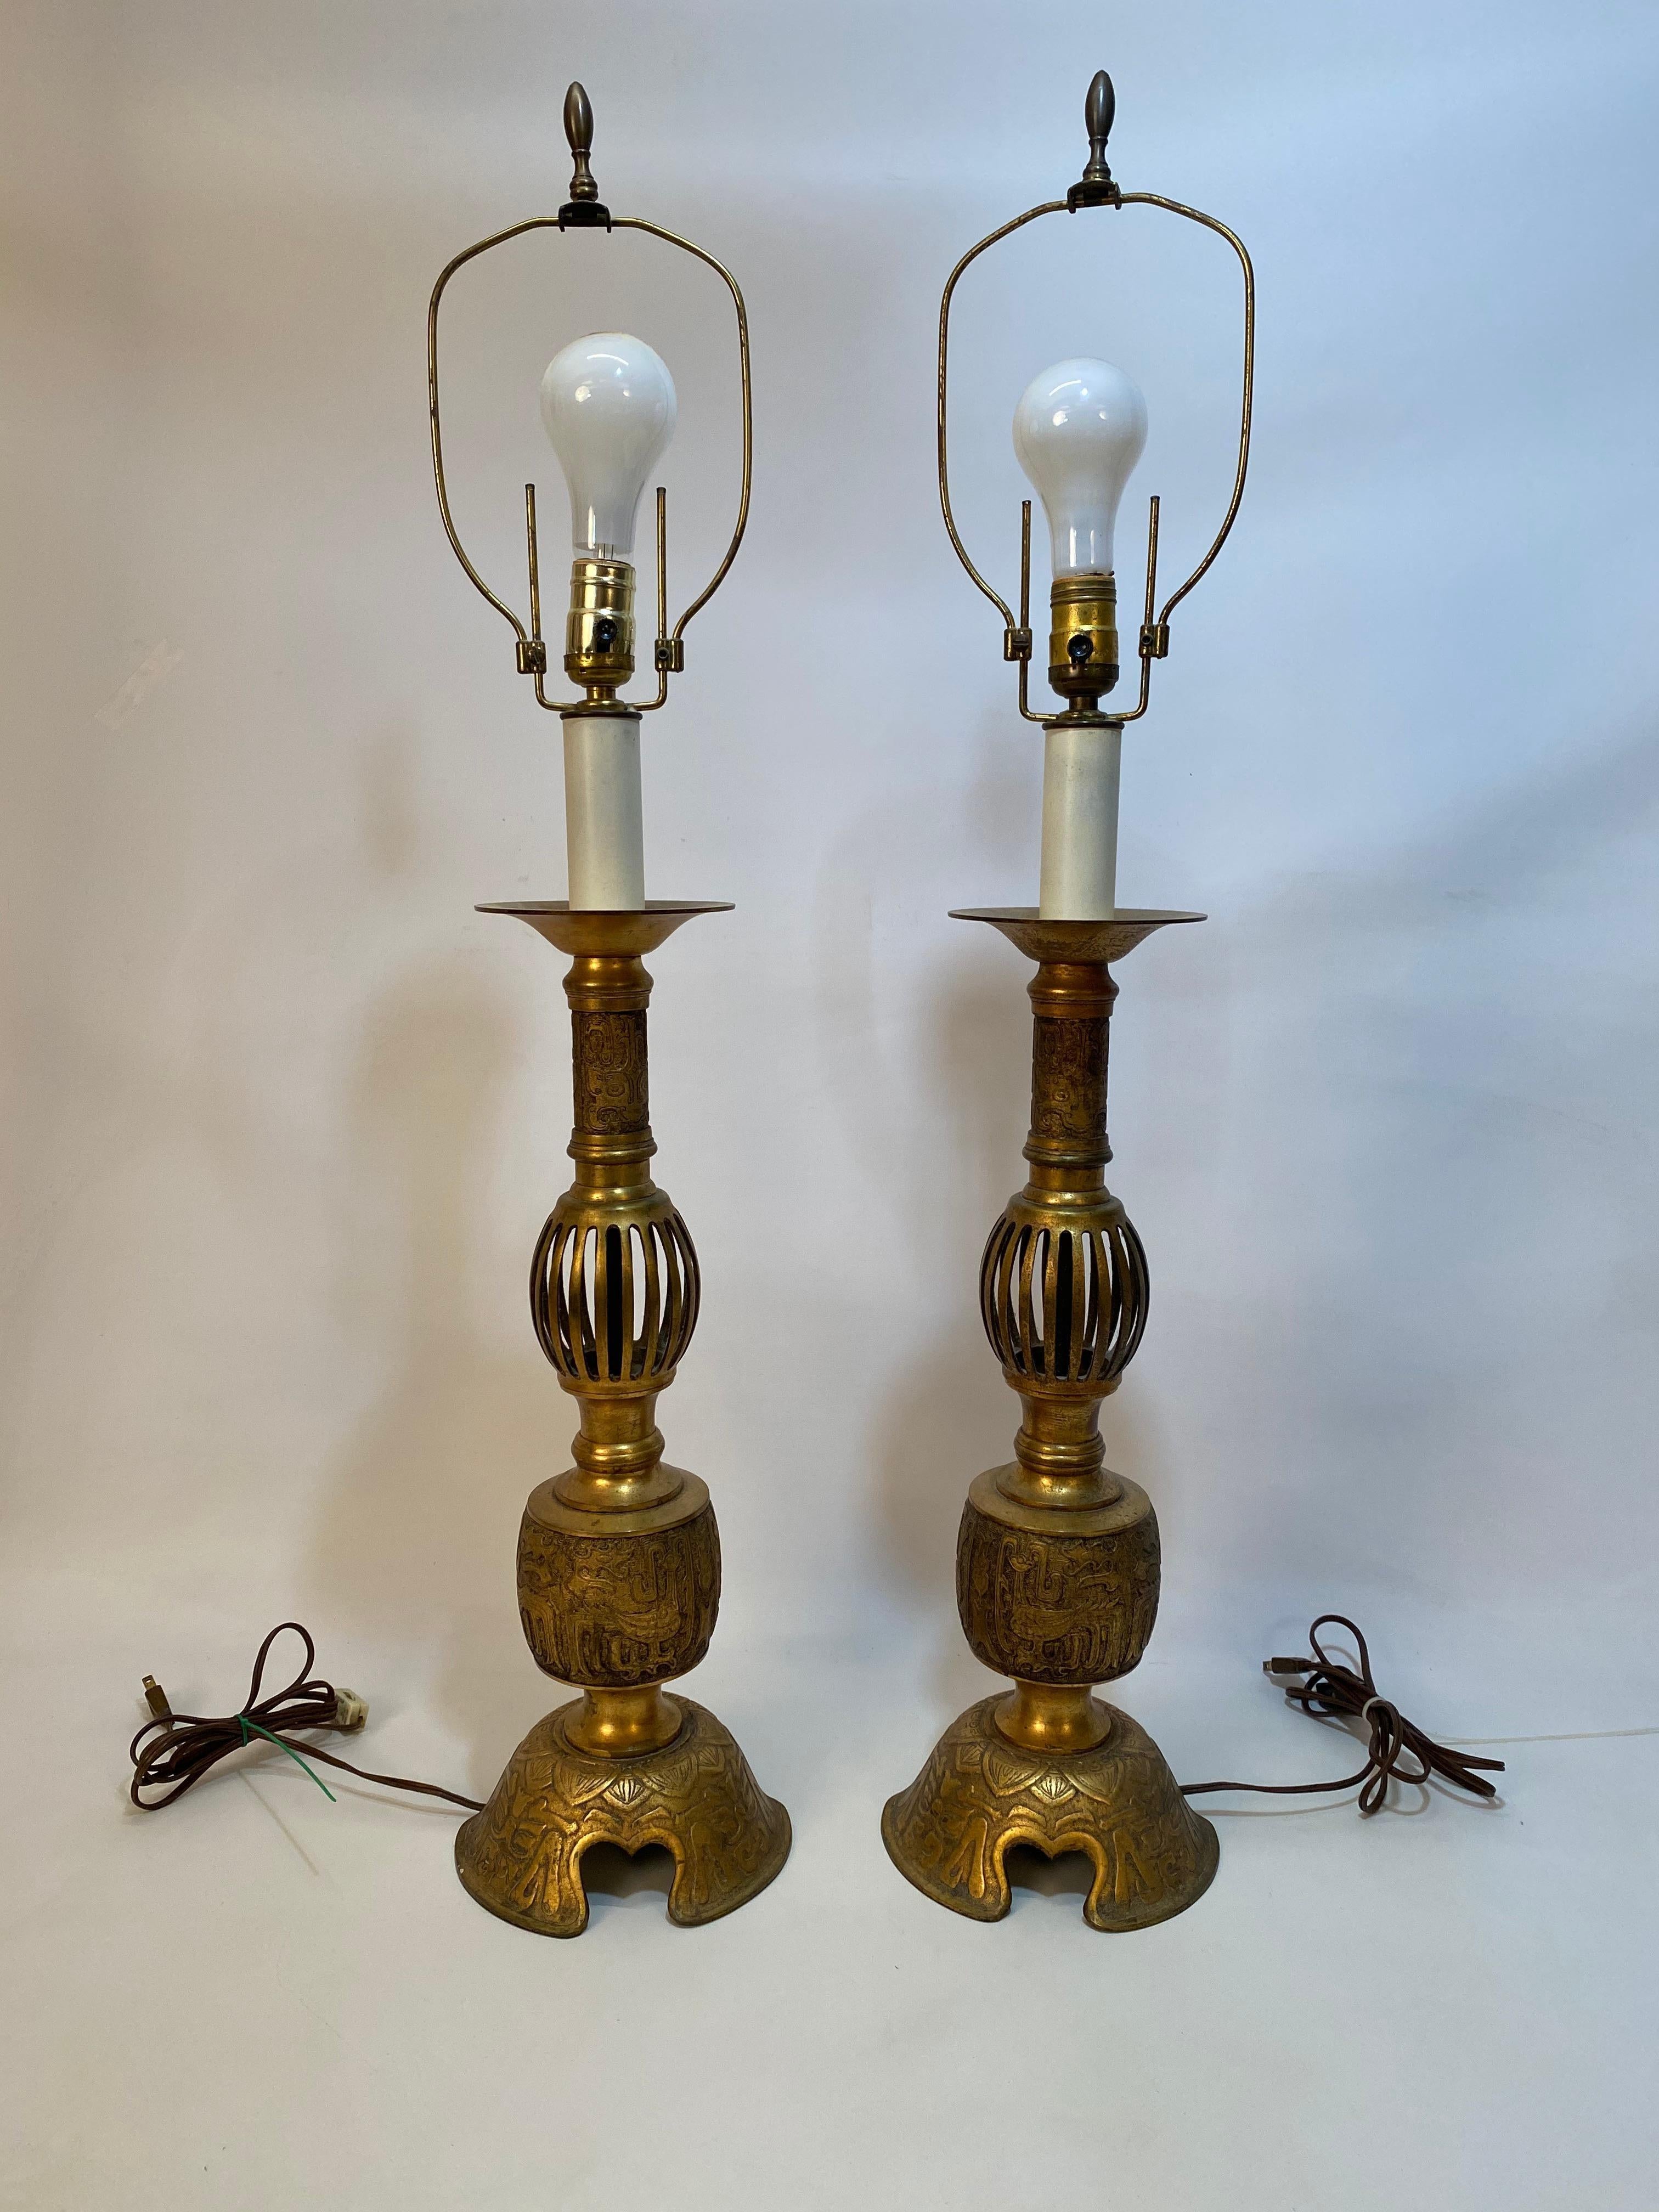 Wonderfully cast and detailed brass lamps. Tall candelabra design. Both signed Japan, circa 1920-1930. Ruffled fabric shades included.. Older wiring in good working condition. Older harps that are easily adjustable for shade height.

Approximately